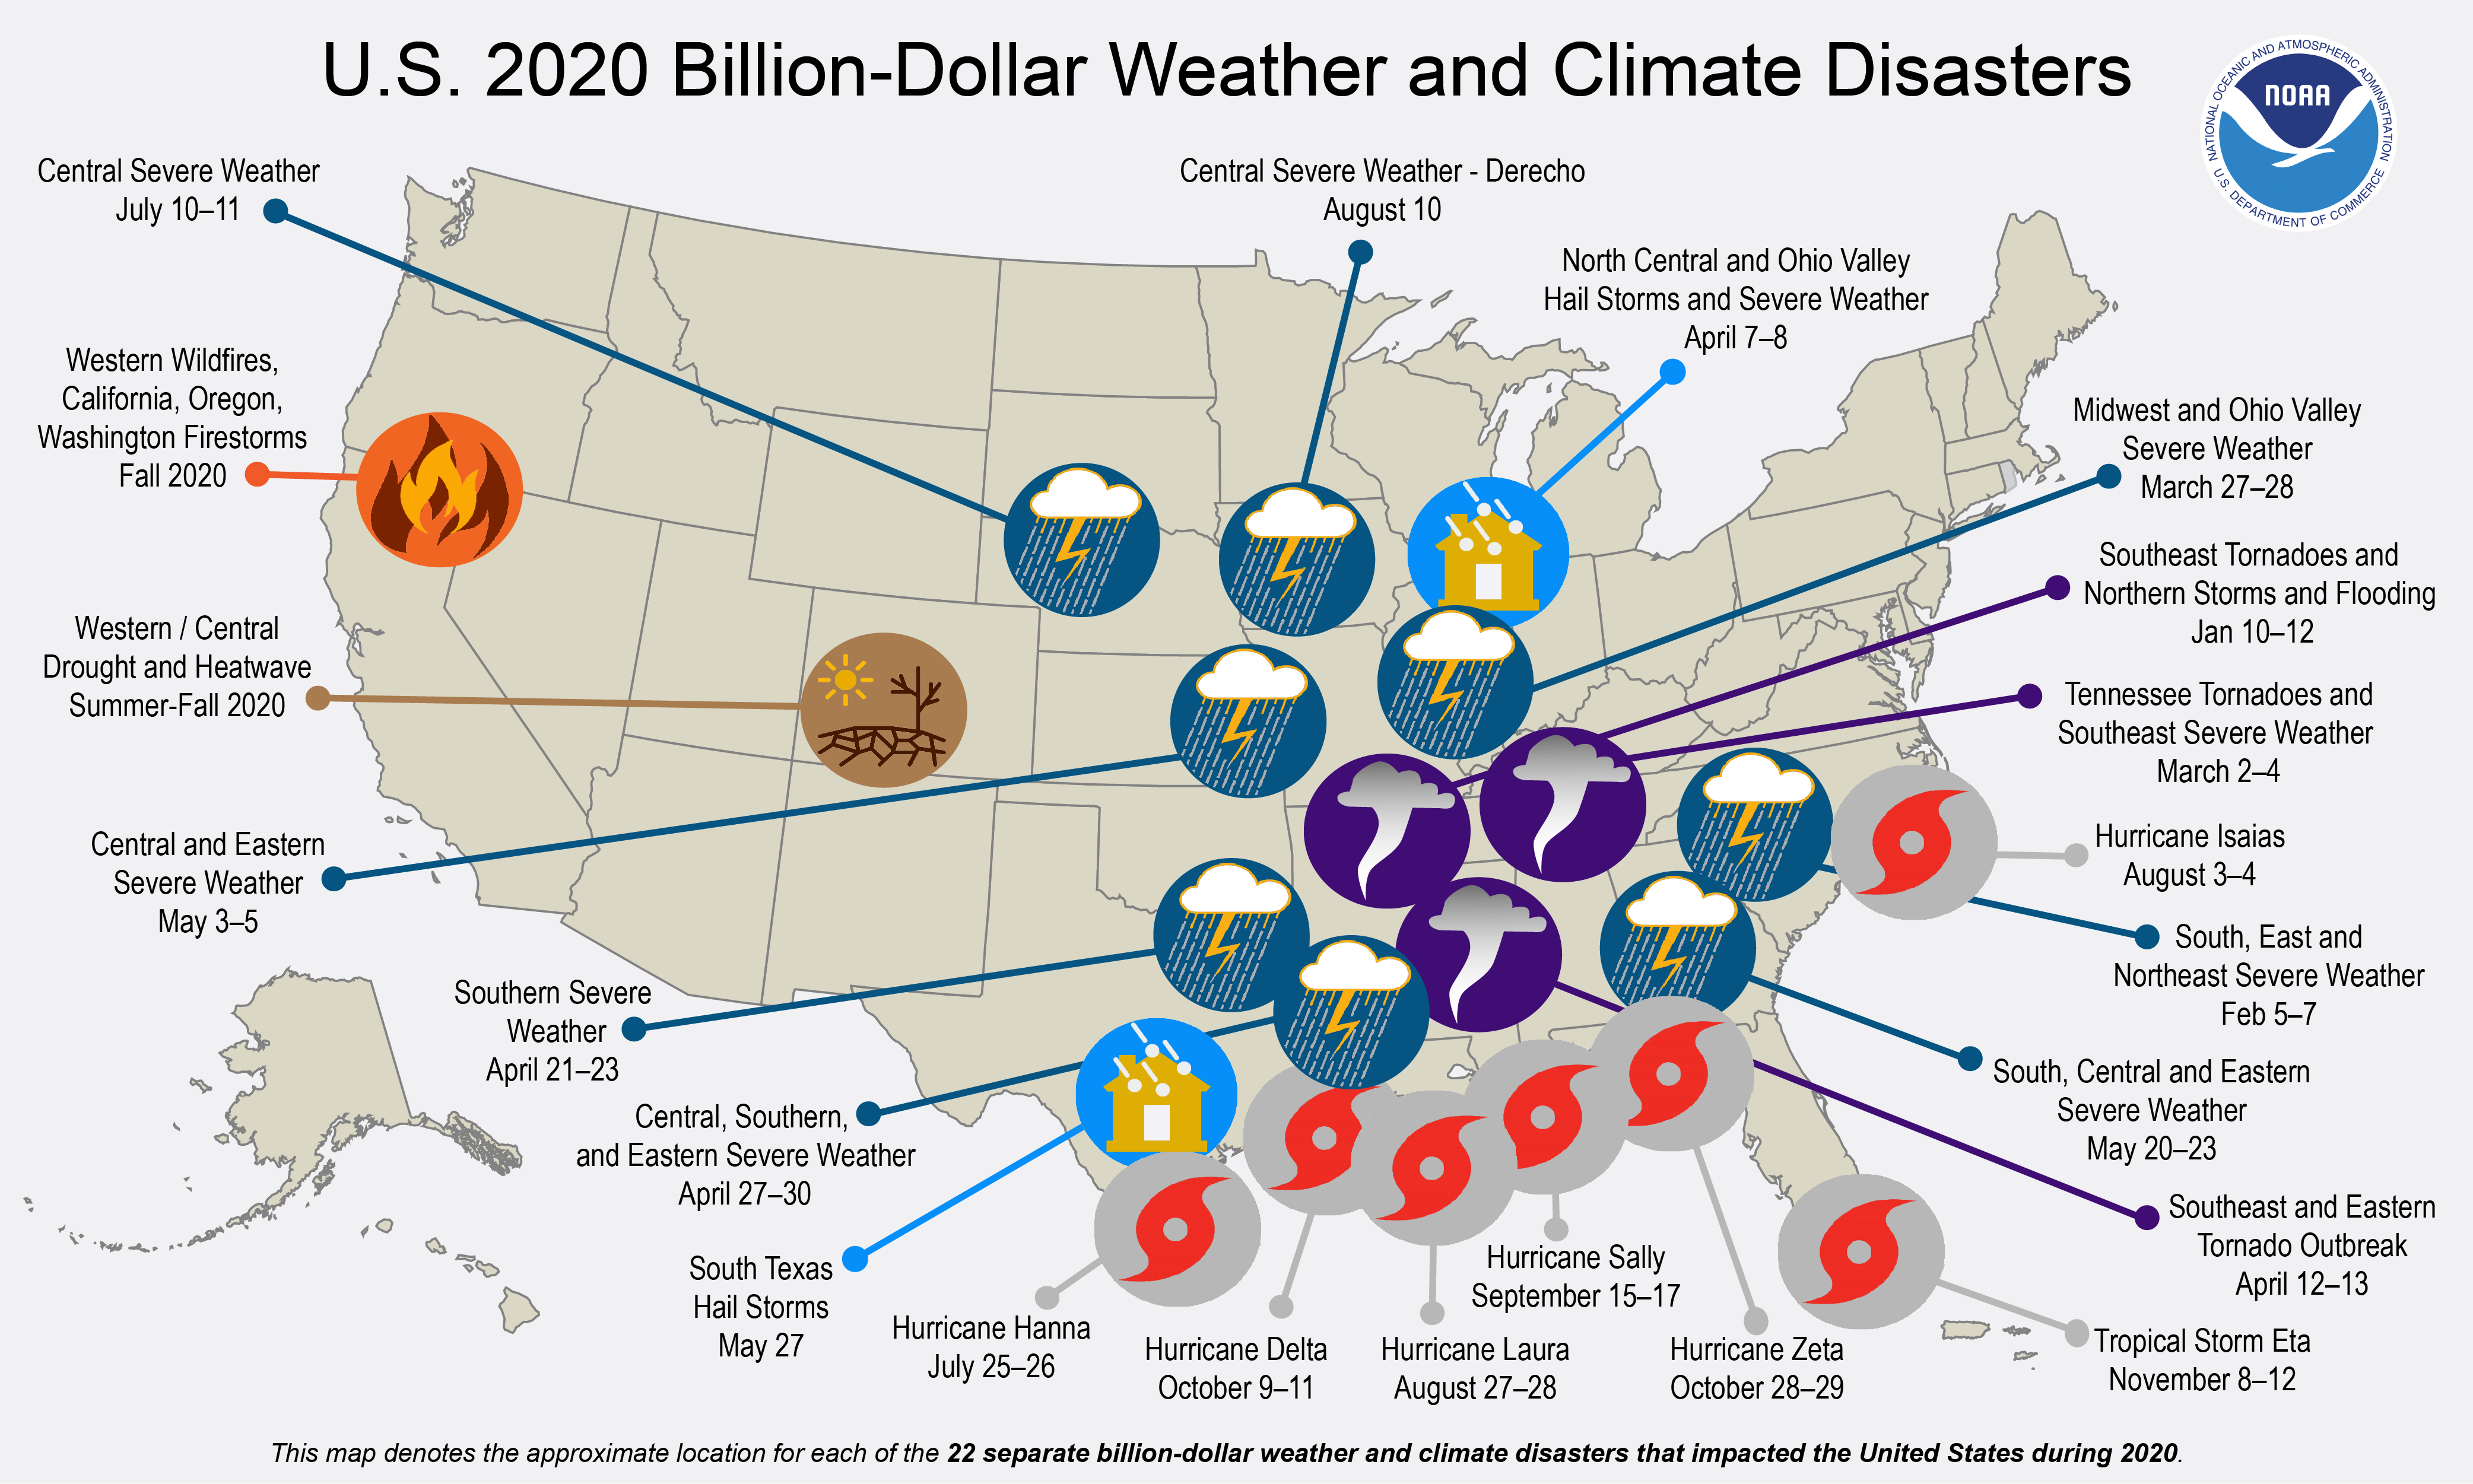 A map of the United States depicting a record-breaking 22 billion-dollar weather and climate disasters that stuck the country in 2020. (See article text below as well as the NCEI report for details about each event located at https://www.ncdc.noaa.gov/billions)